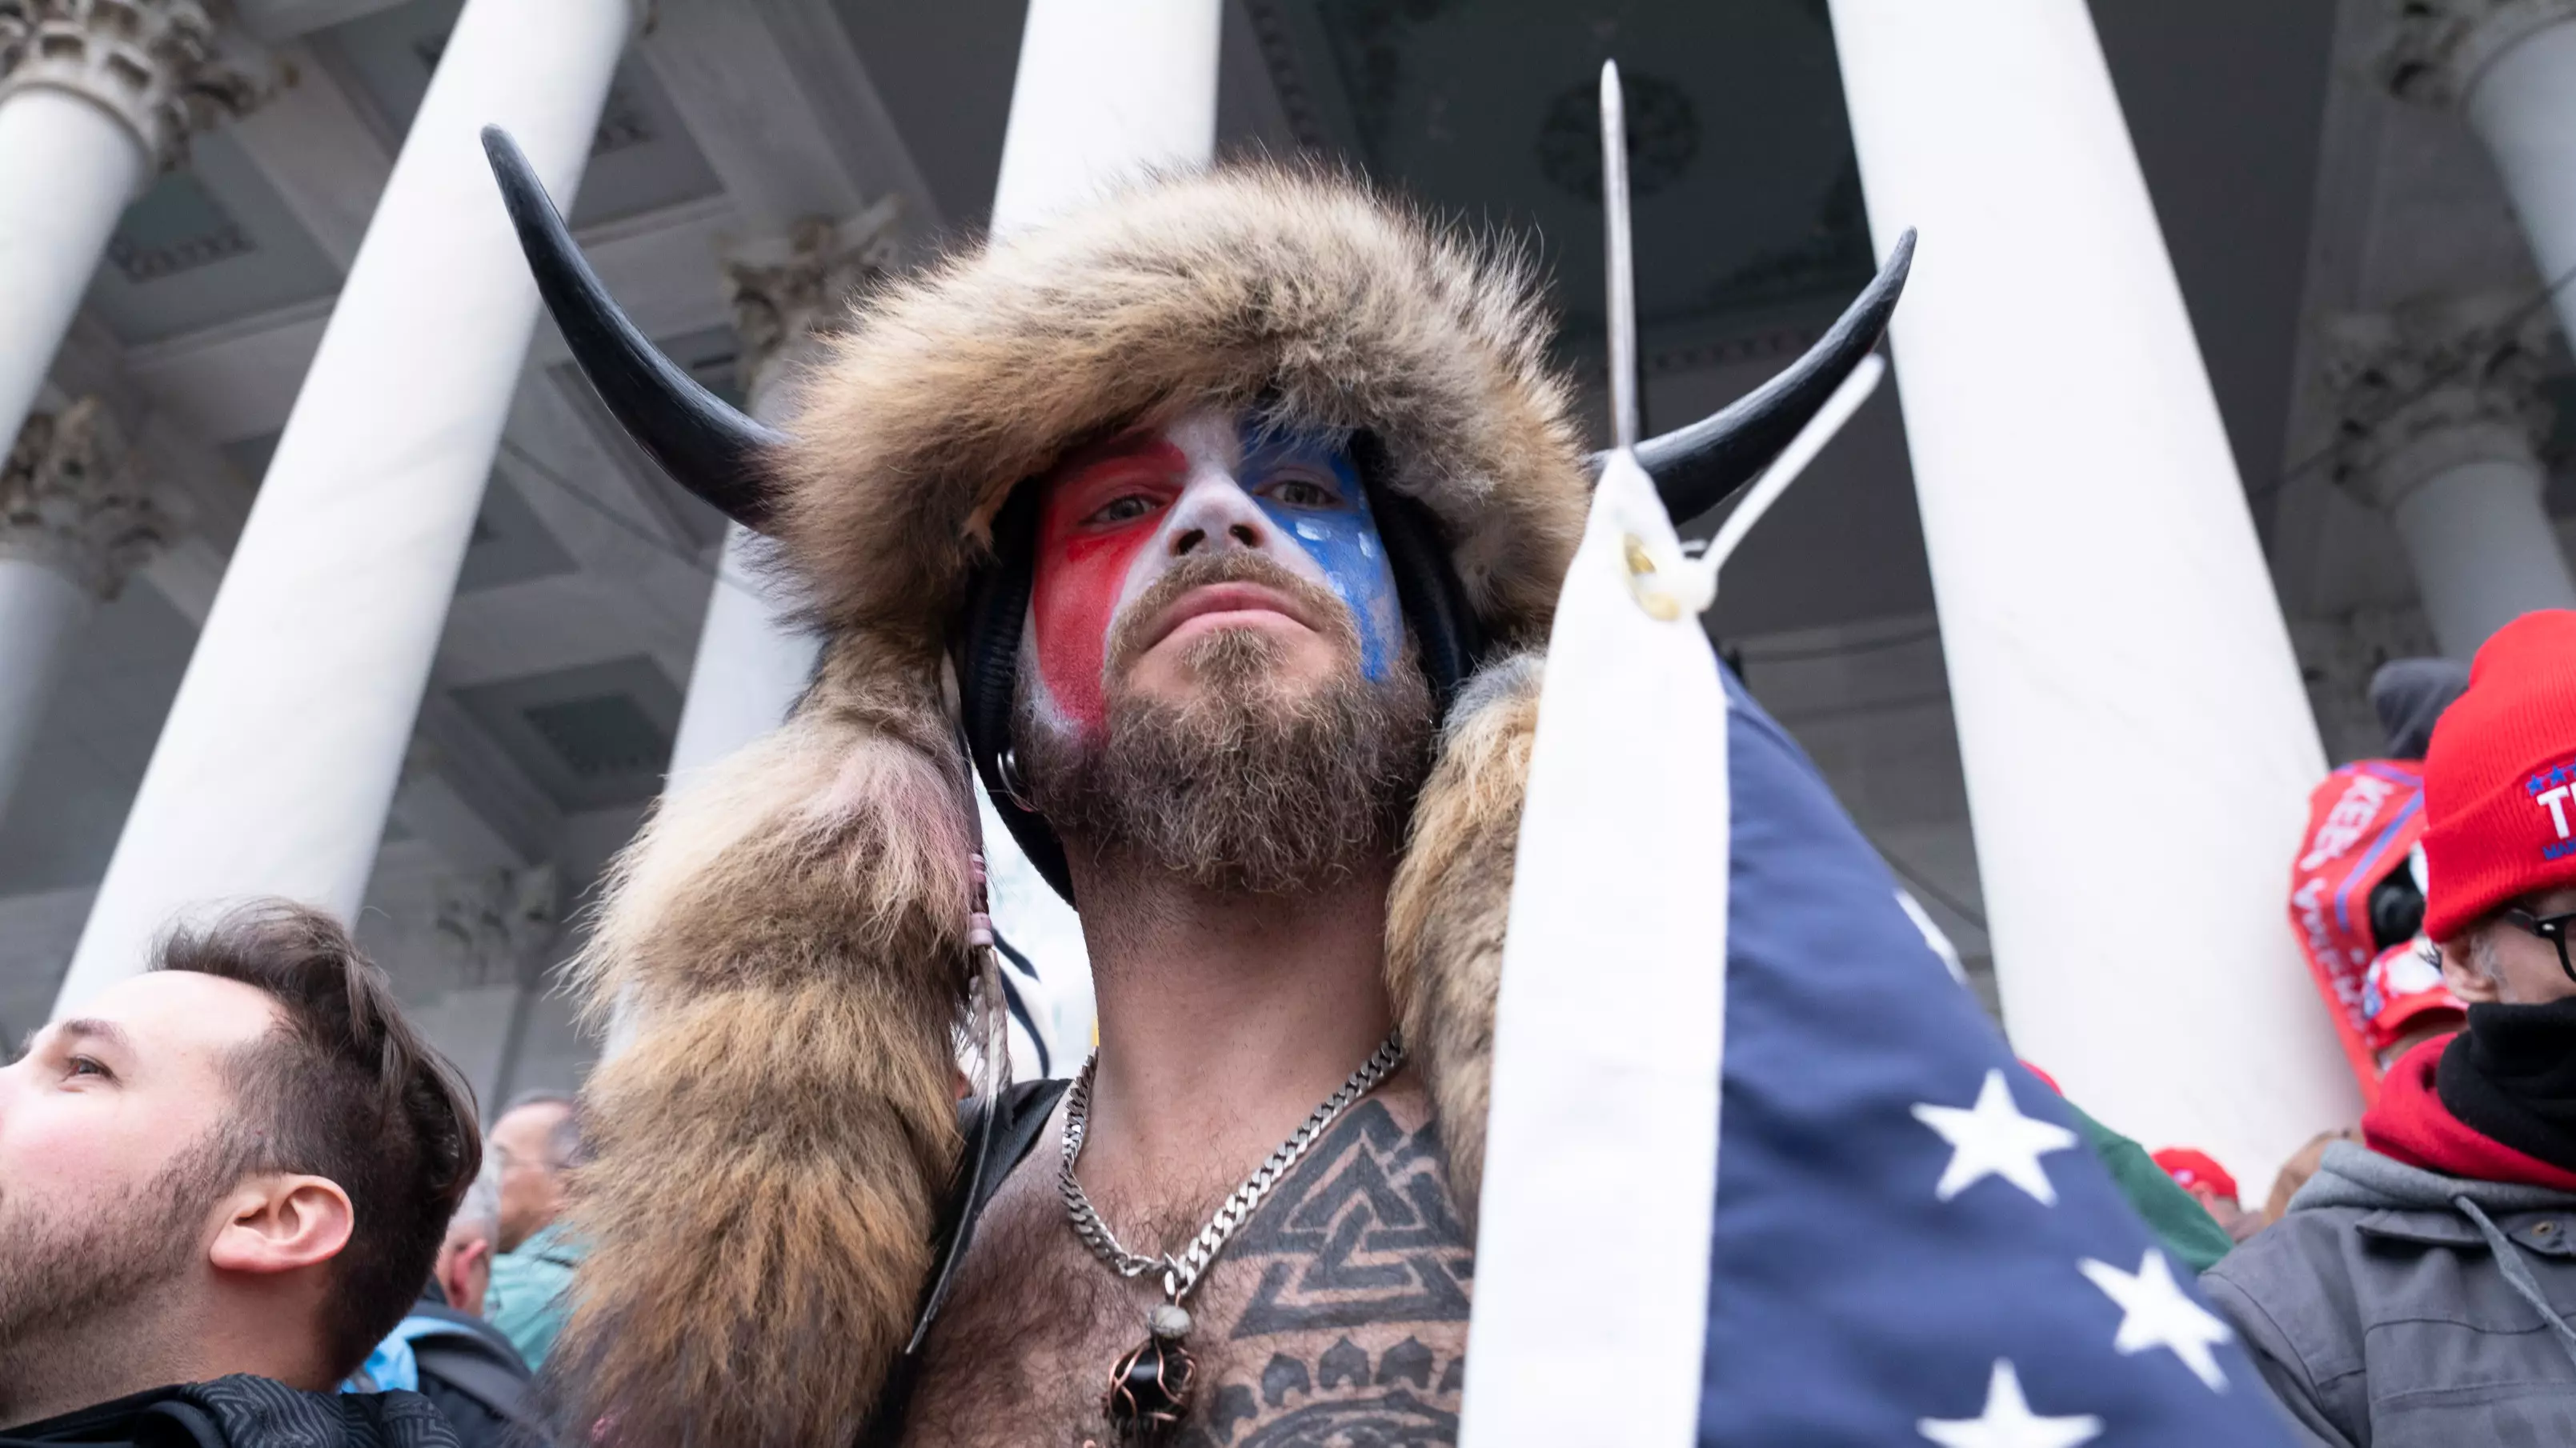 'QAnon Shaman' Jacob Chansley Has Been Charged Over Capitol Riots